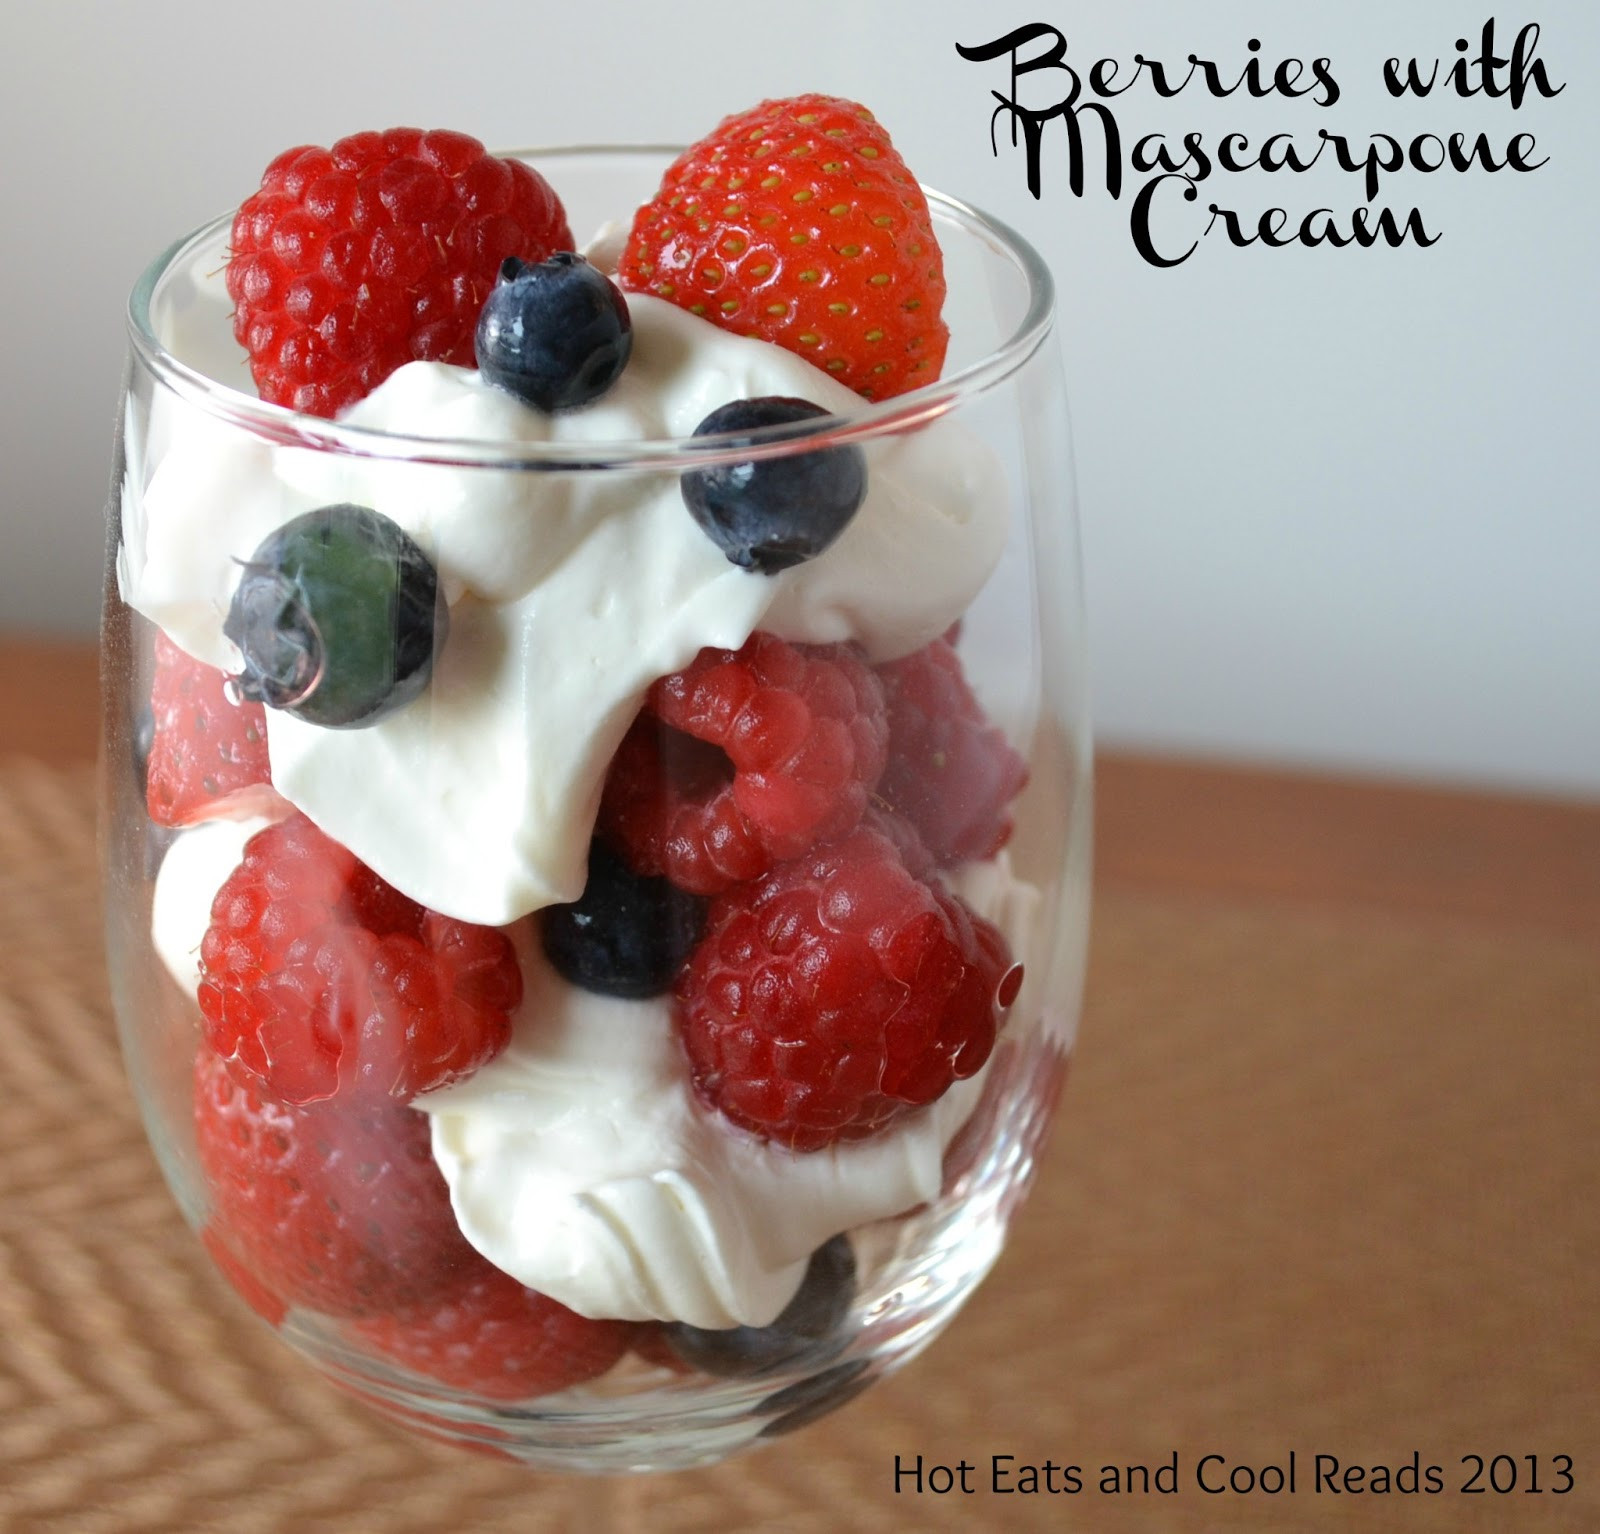 Mascarpone Desserts Recipe
 Hot Eats and Cool Reads Patriotic Dessert Berries with